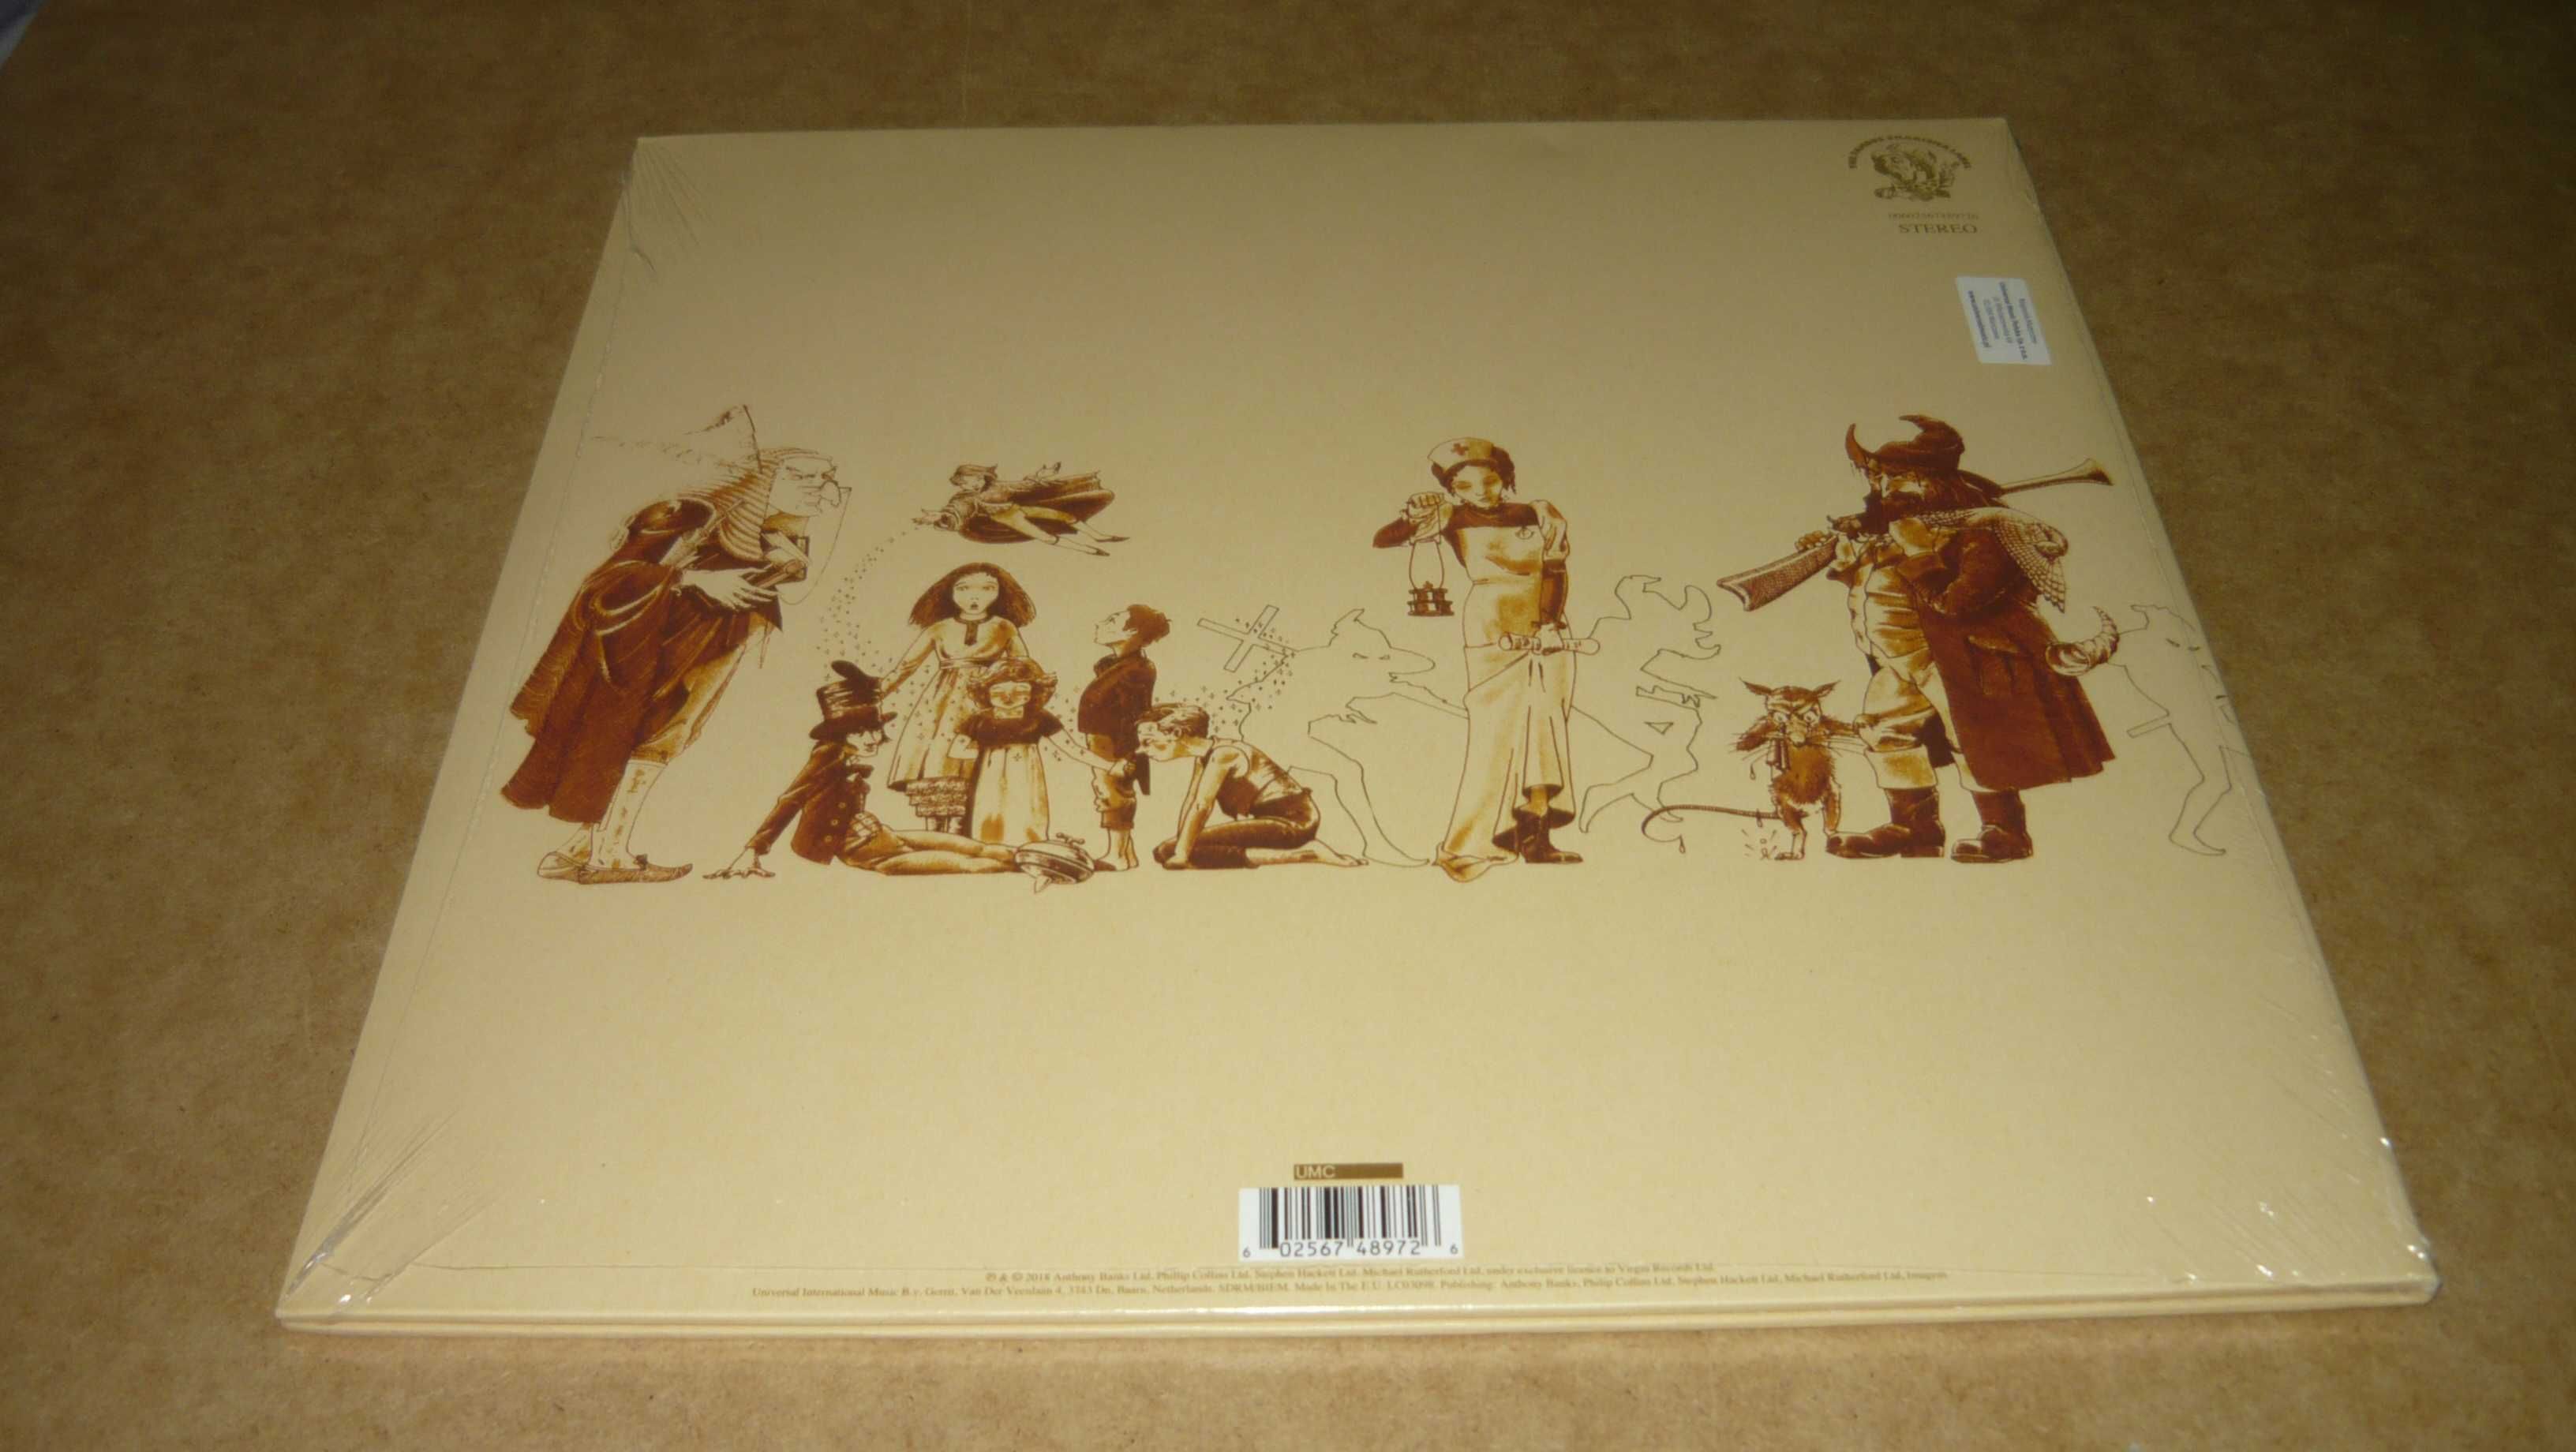 Genesis A trick of the tail LP